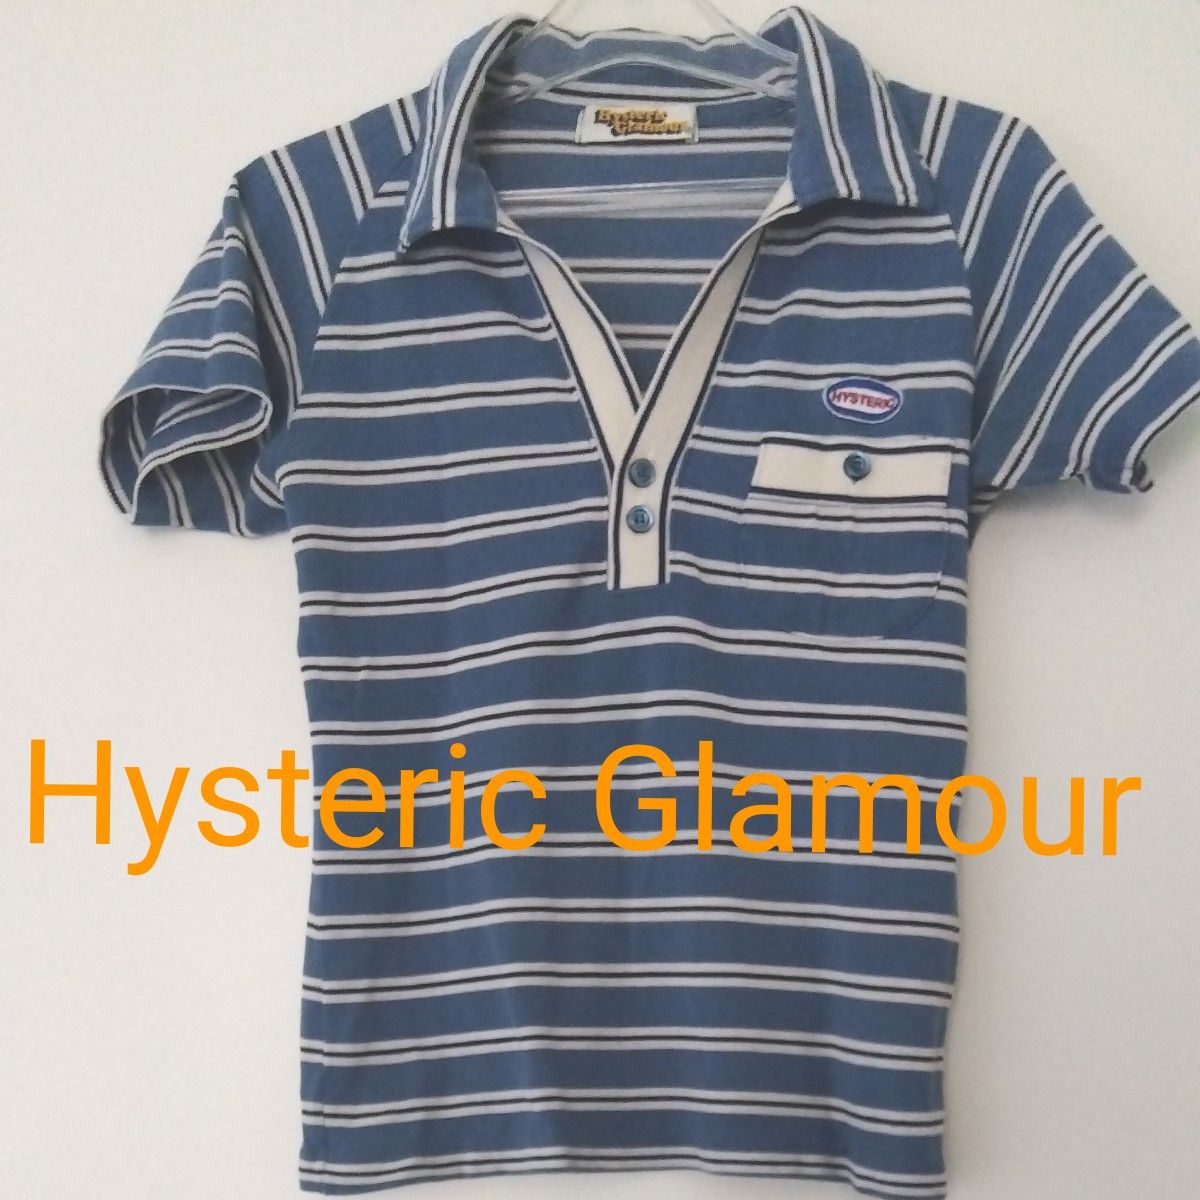 HYSTERIC GLAMOUR　カットソー